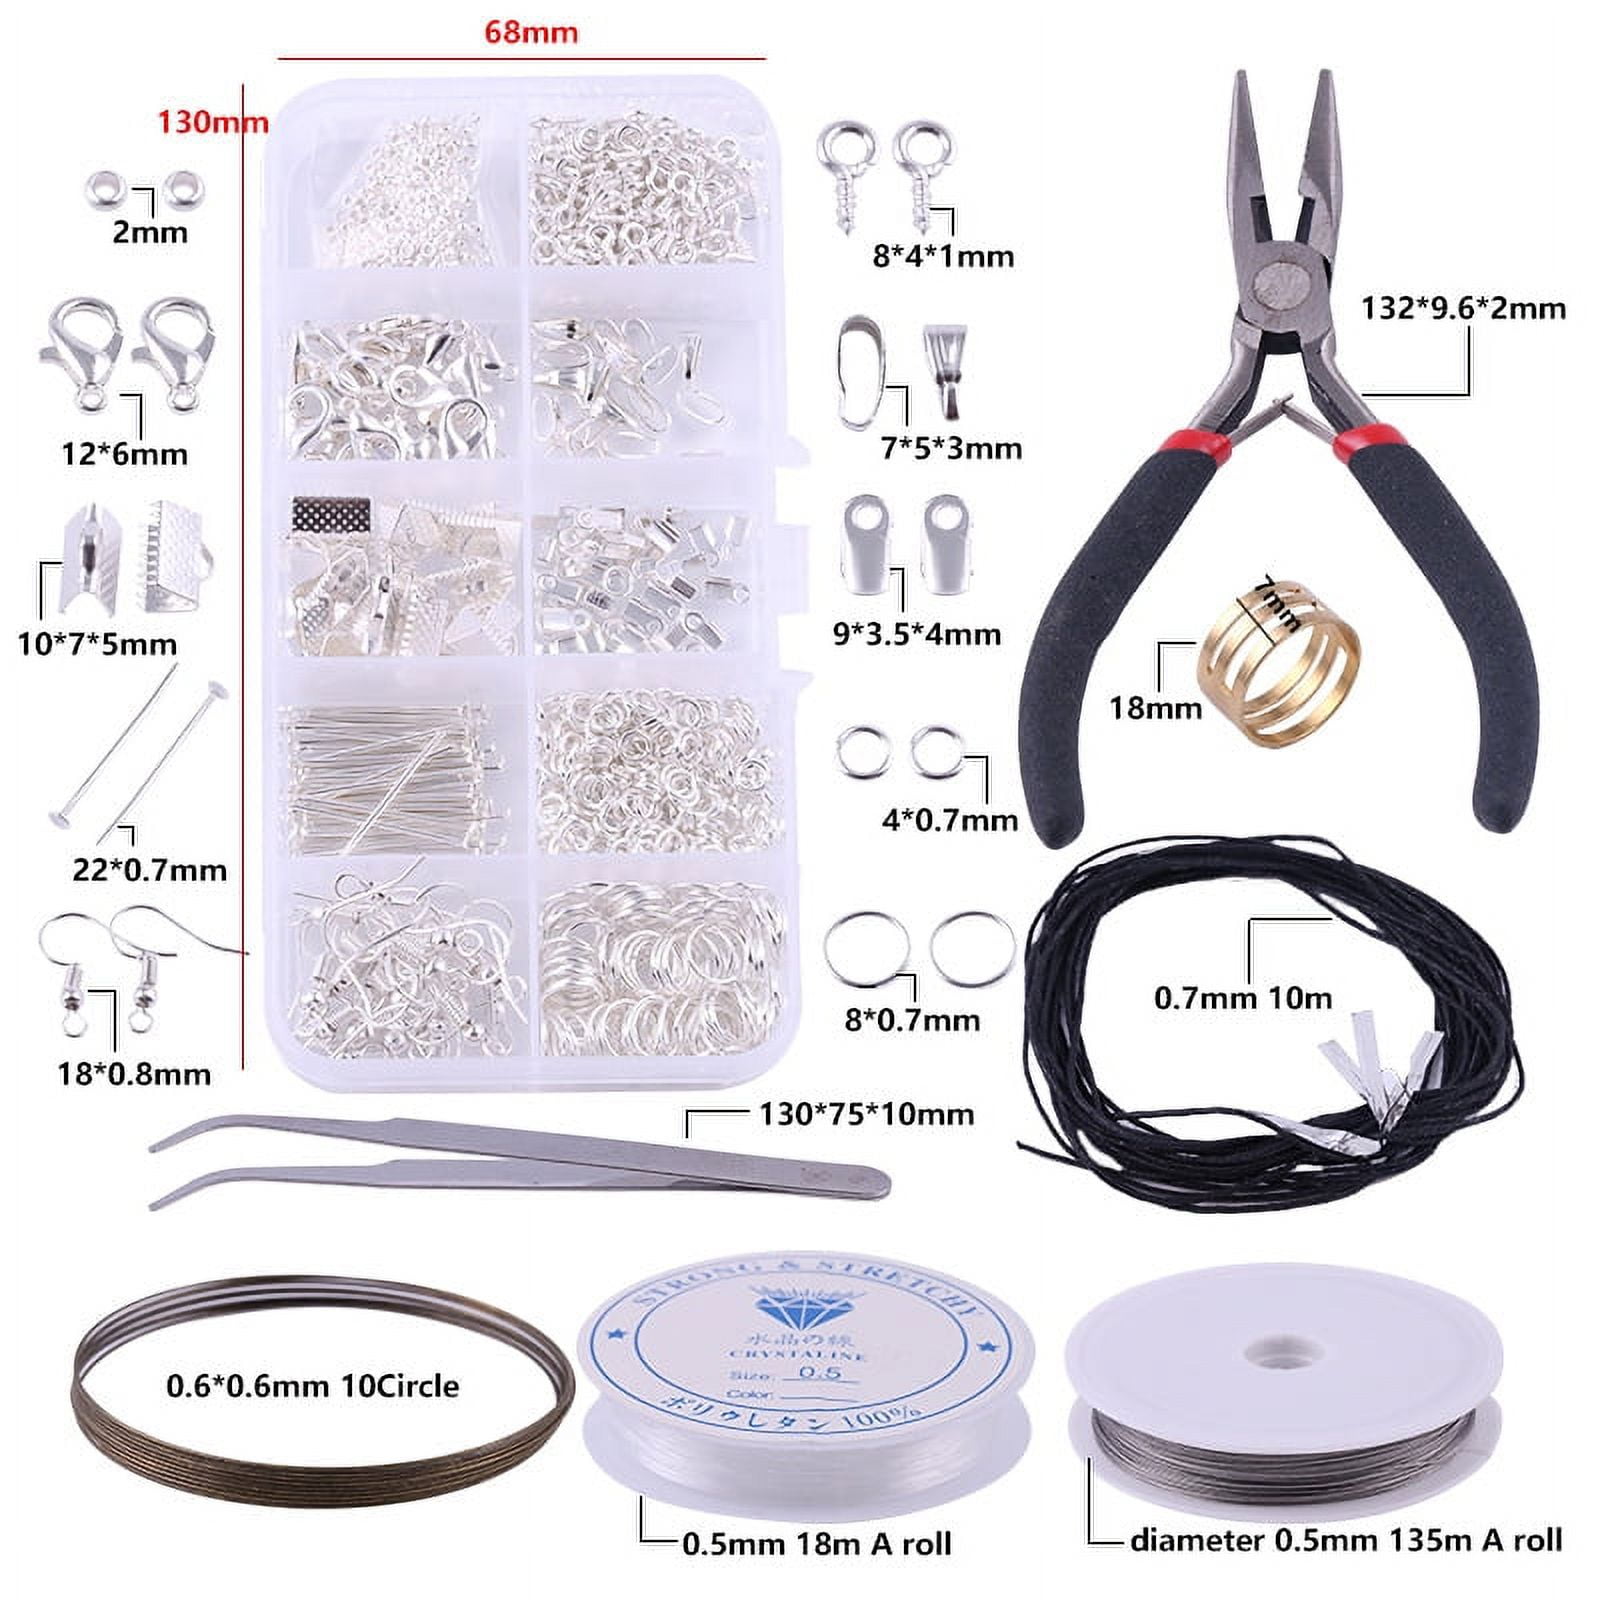 Jewelry Making Kit, 14 Piece Jewelry Repair Tool Set With Silver Wire  Pliers - Accessories For Bracelet, Earring Making